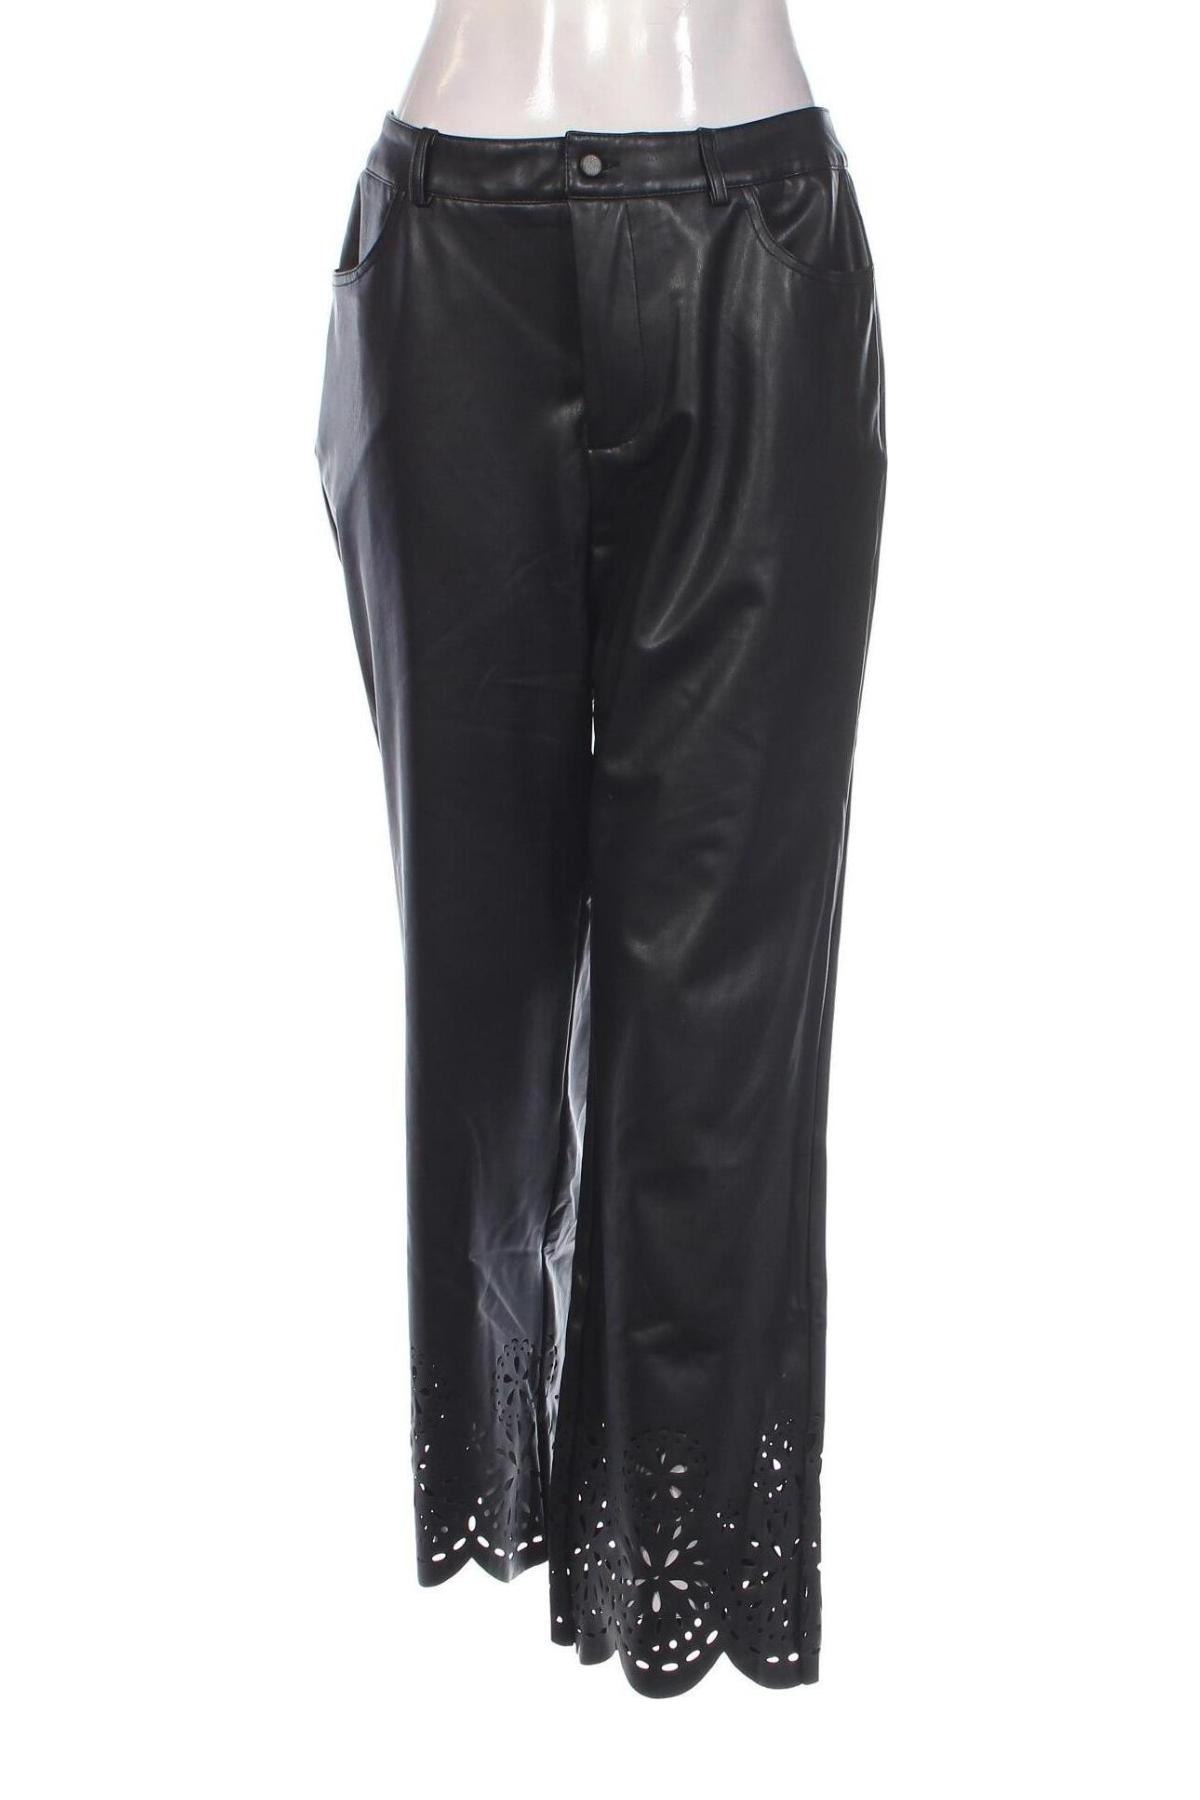 Damenhose Katy Perry exclusive for ABOUT YOU, Größe L, Farbe Schwarz, Preis € 16,78